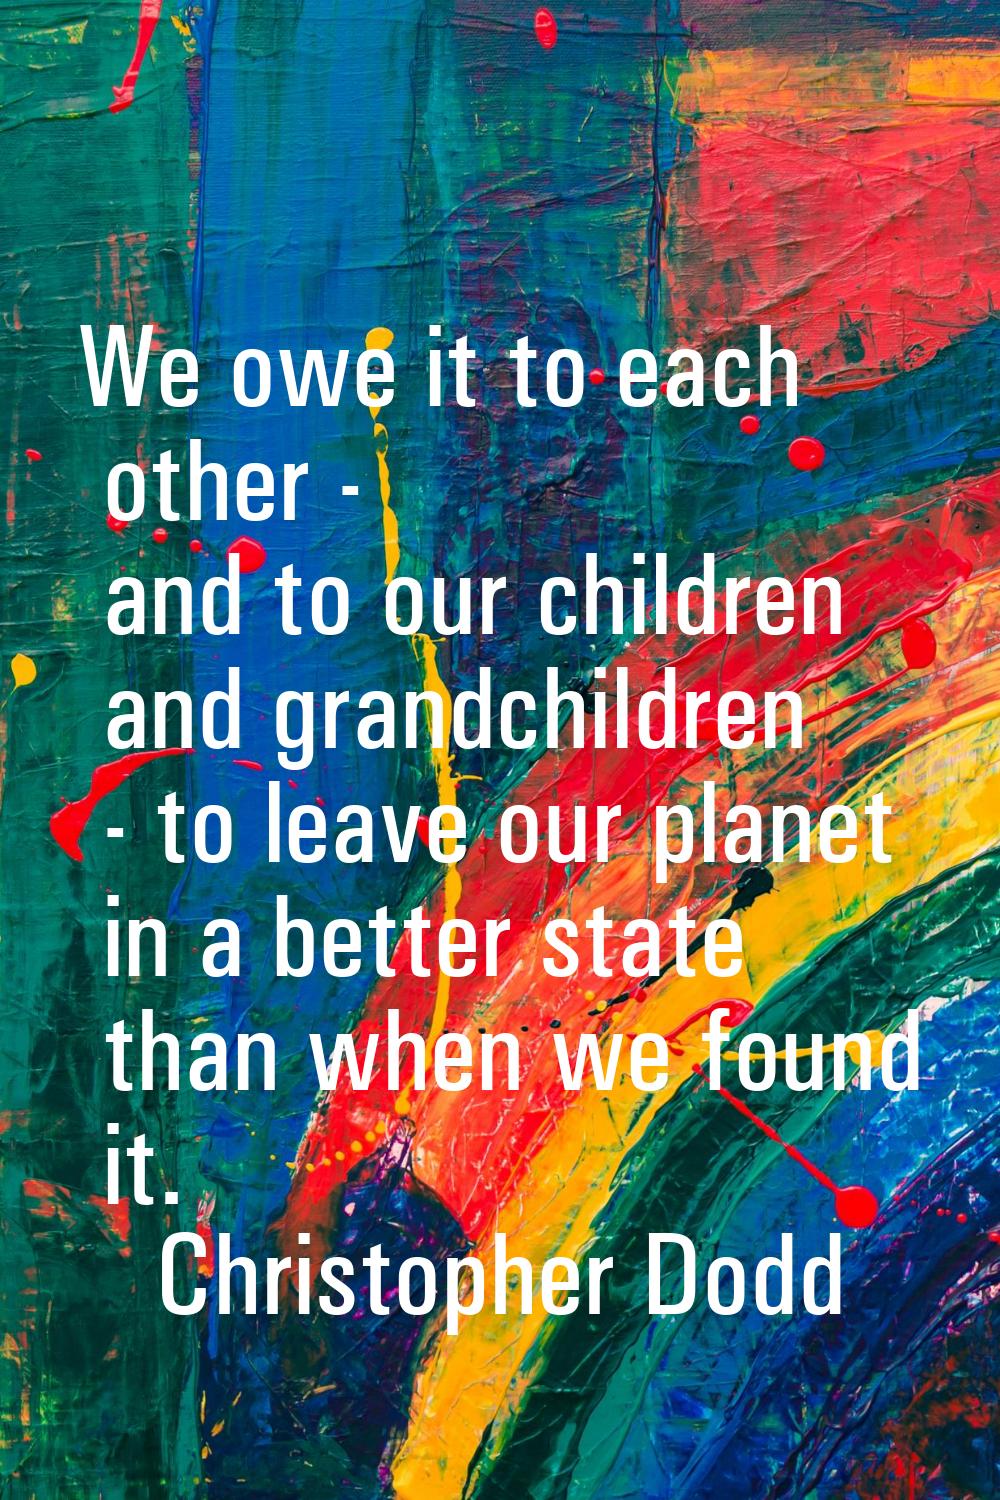 We owe it to each other - and to our children and grandchildren - to leave our planet in a better s